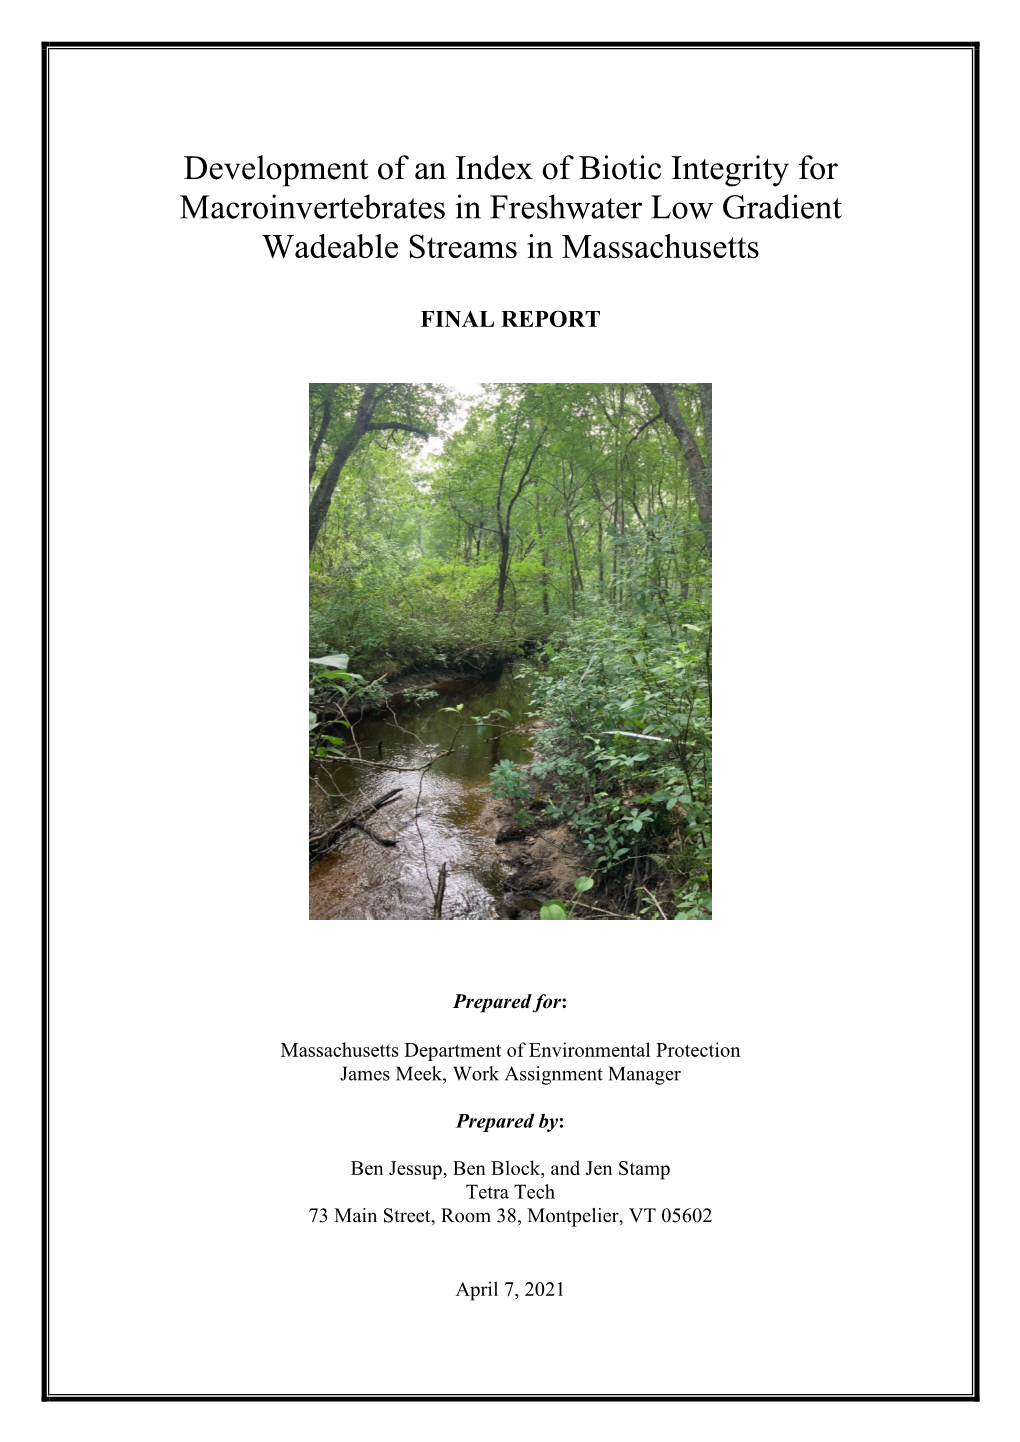 Development of an Index of Biotic Integrity for Macroinvertebrates in Freshwater Low Gradient Wadeable Streams in Massachusetts